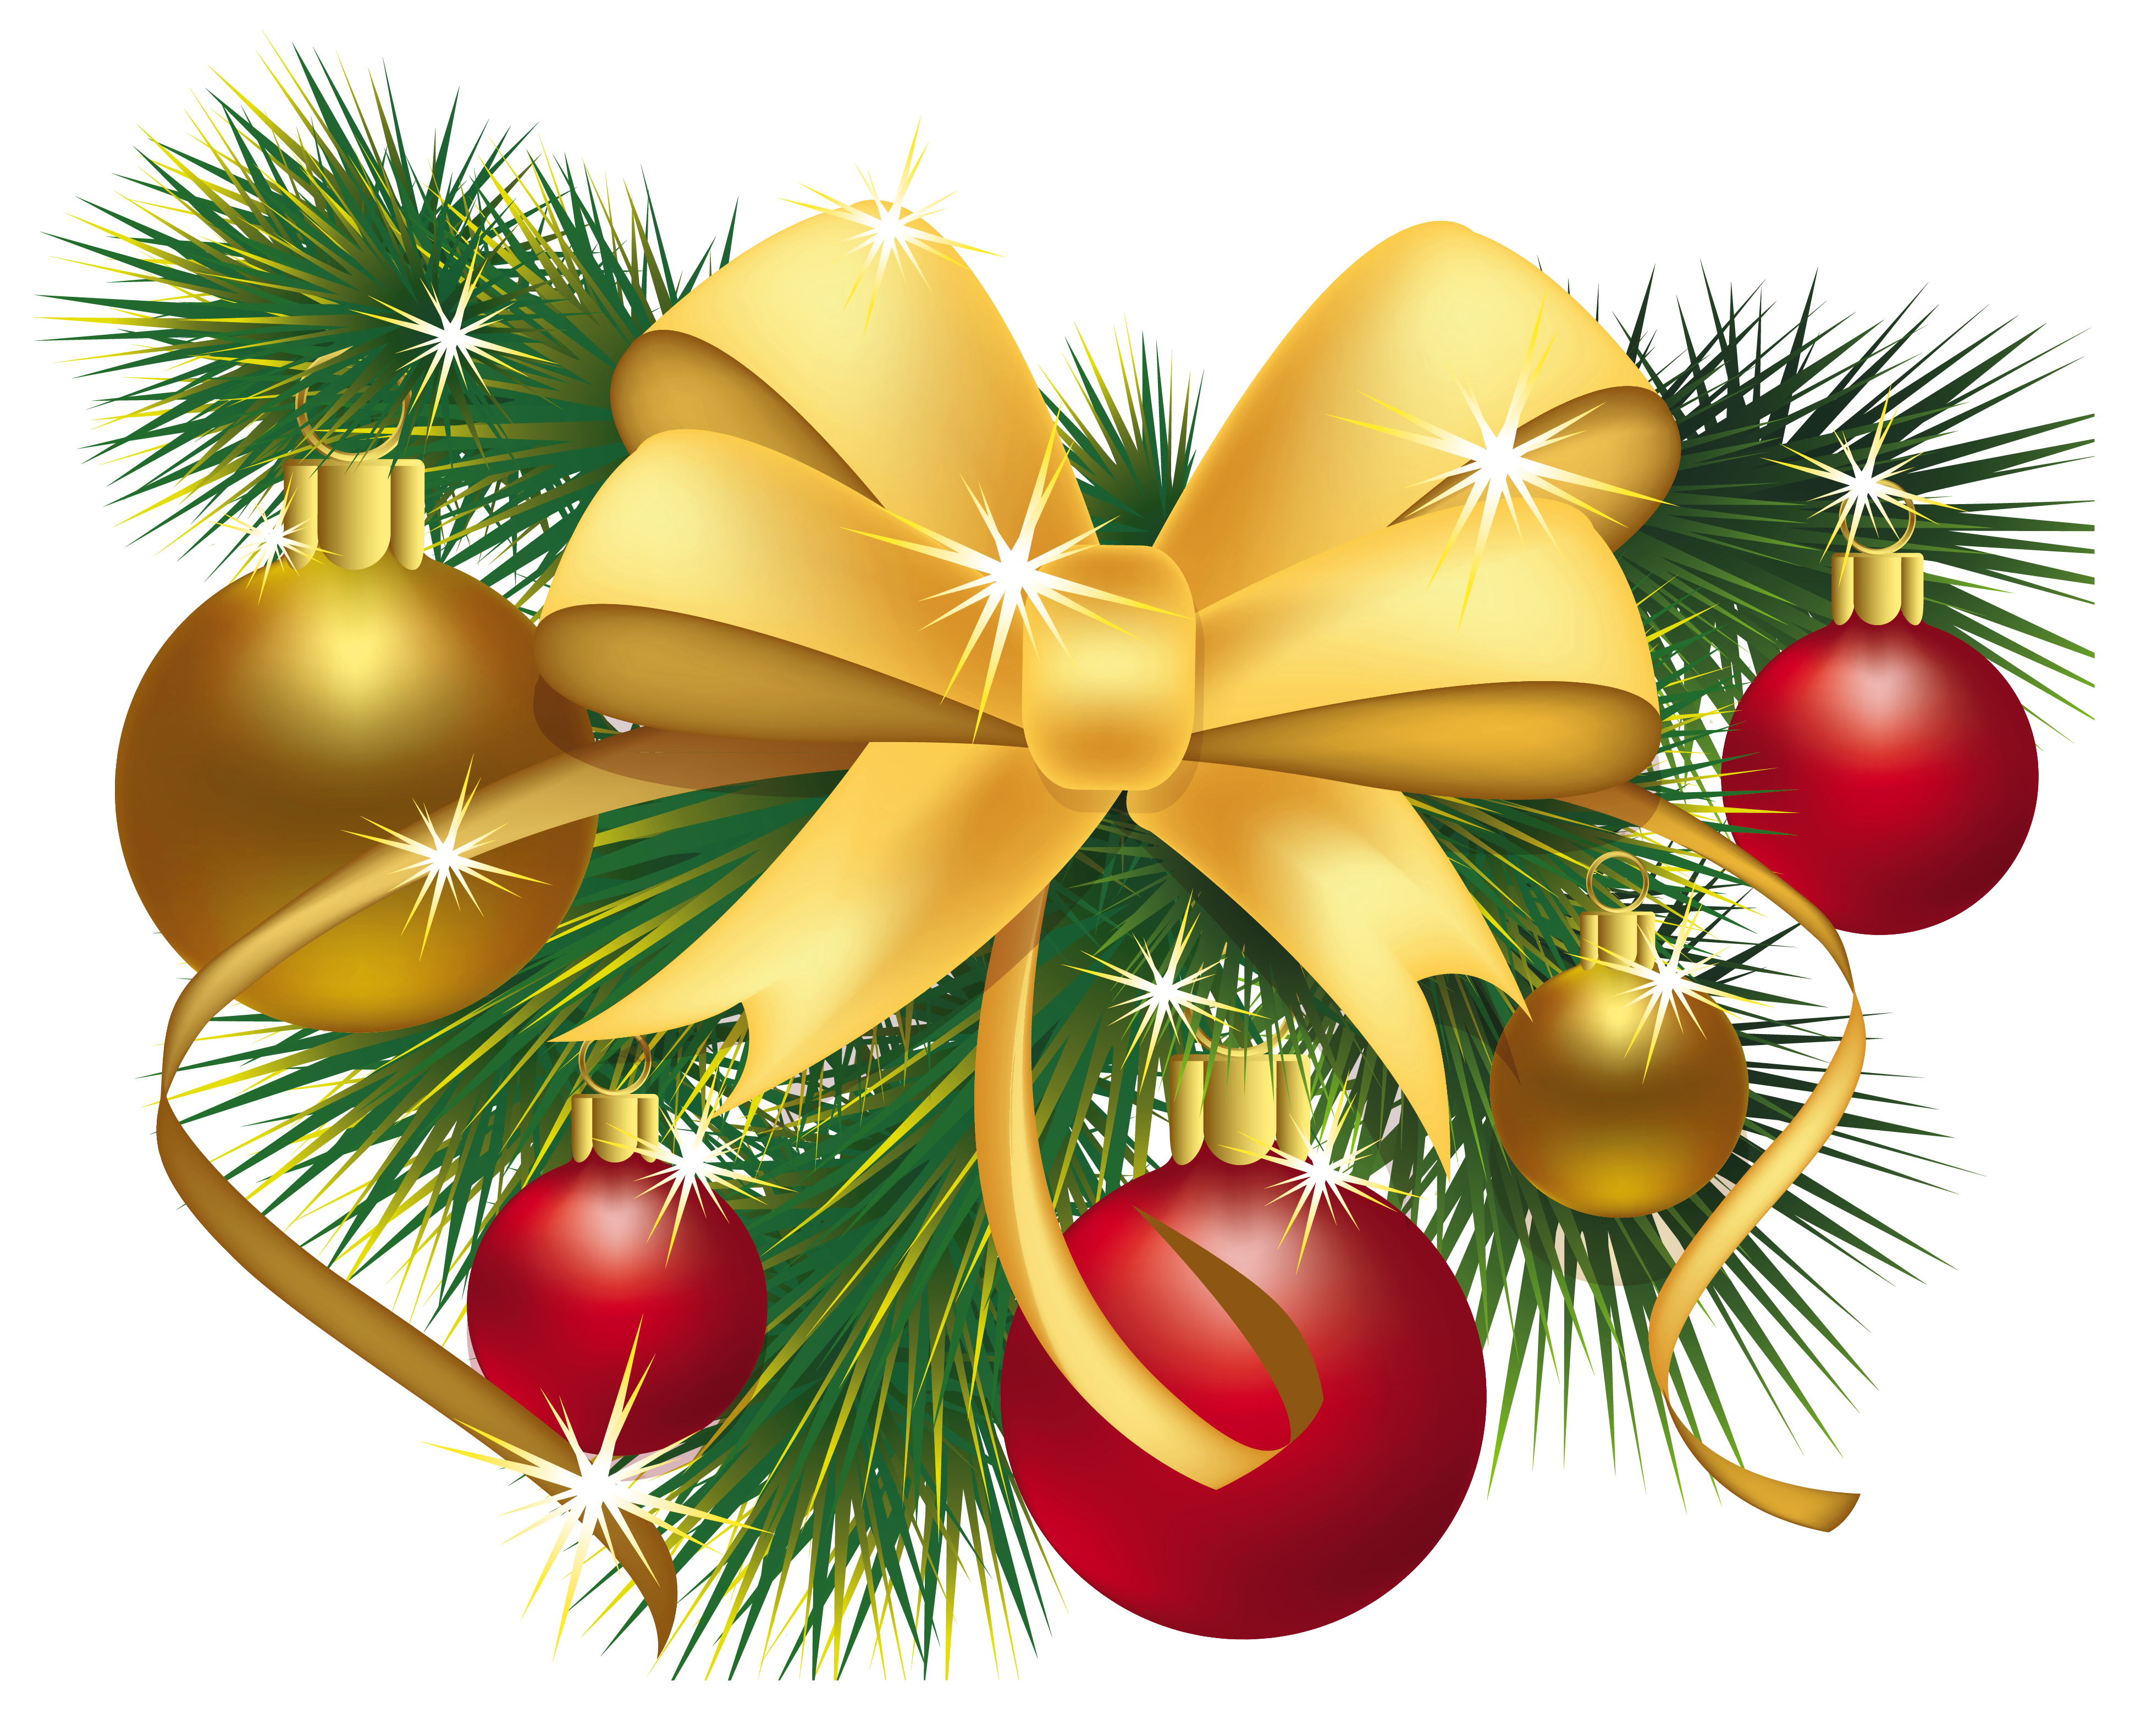 High Resolution Christmas Icon Png Transparent Background Free Download 47090 Freeiconspng